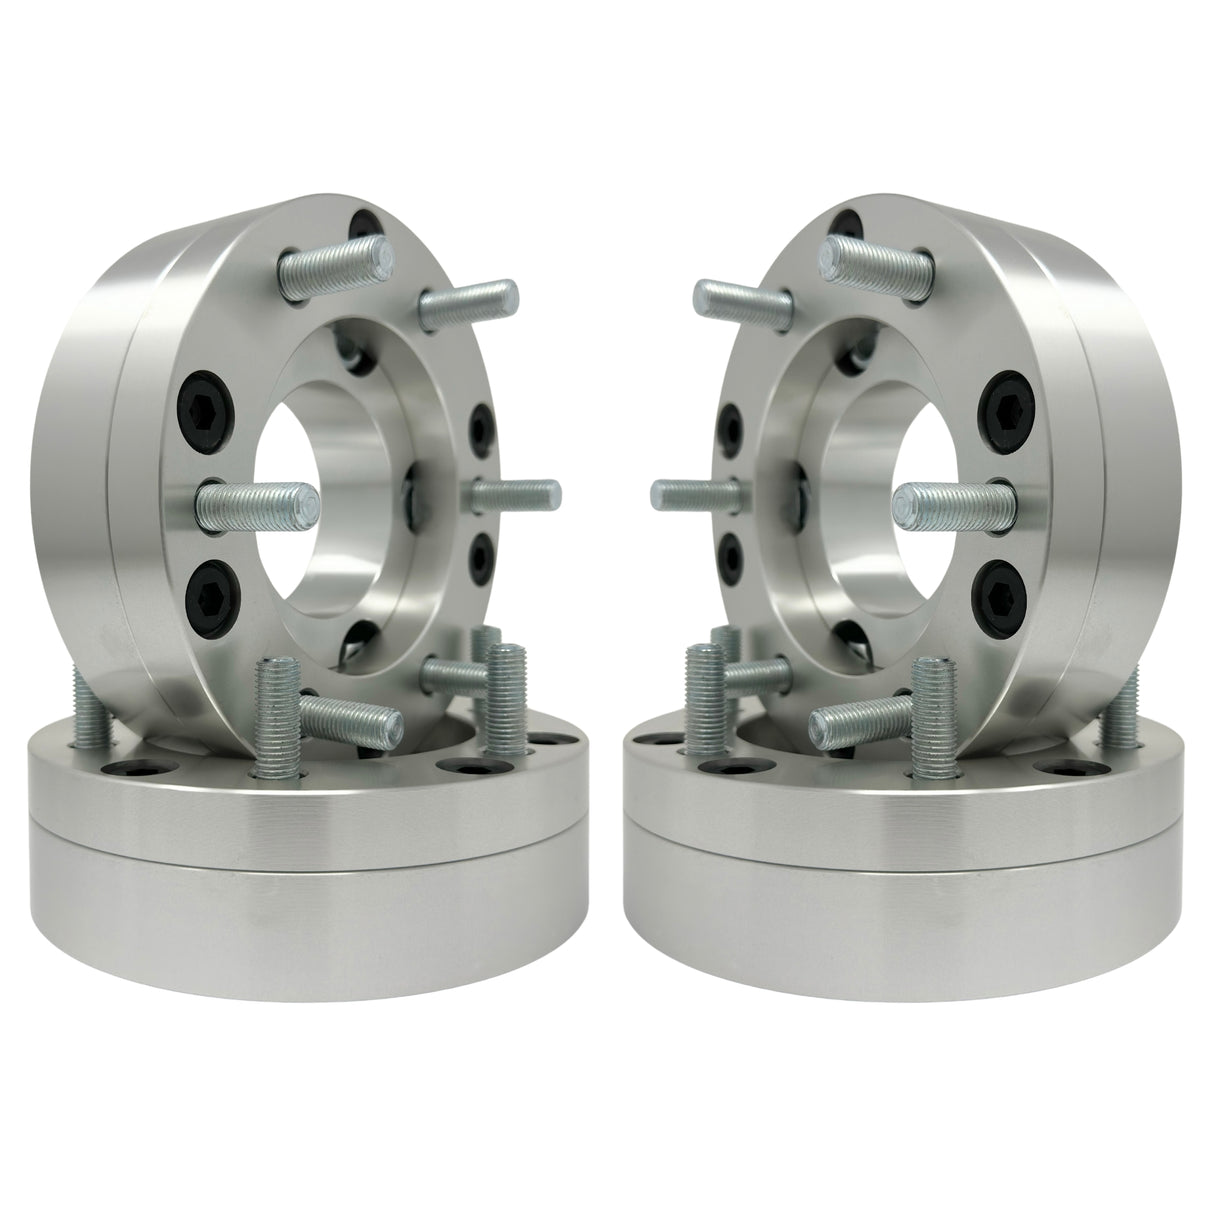 5x5.5 to 6x5.5 2-Piece Wheel Adapter 2” Inch (50mm) 14x1.5 Studs & Lug Nuts 108mm Center Bore | 5x139.7 to 6x139.7